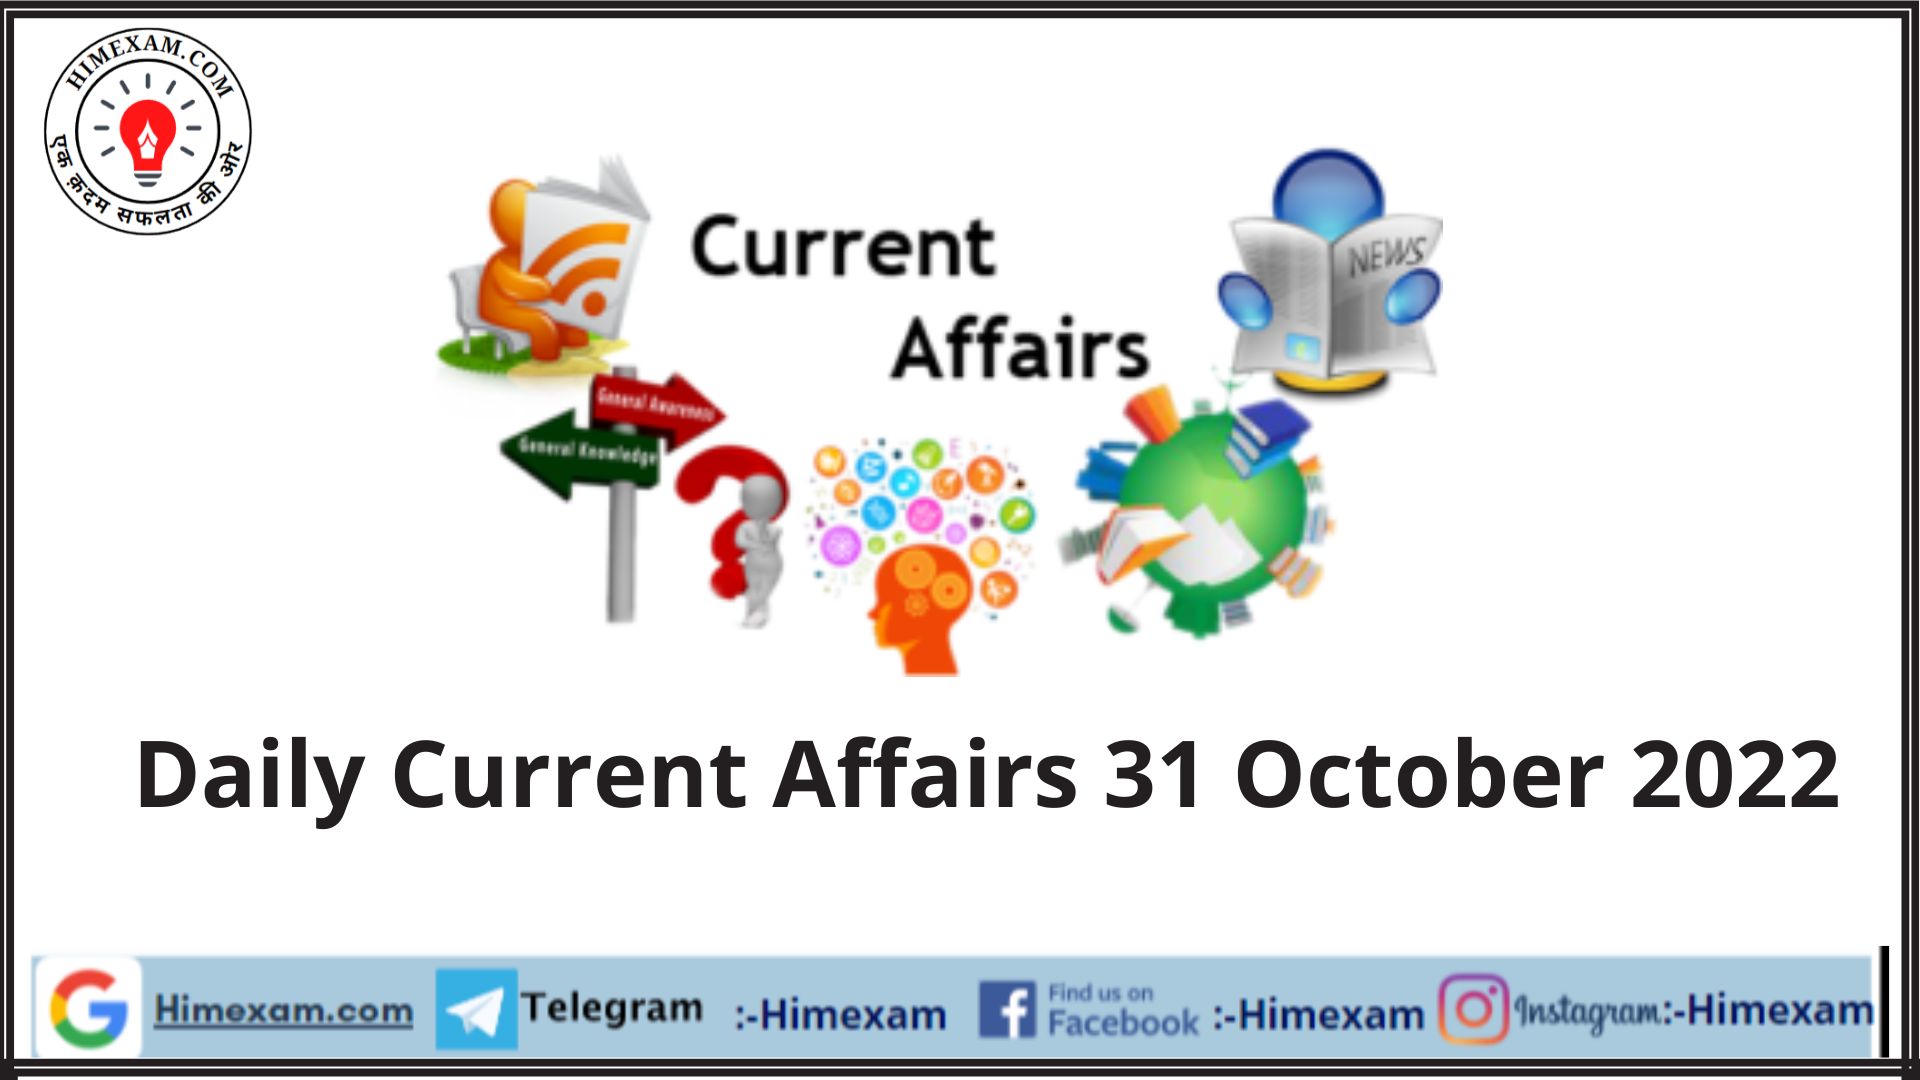 Daily Current Affairs 31 October 2022